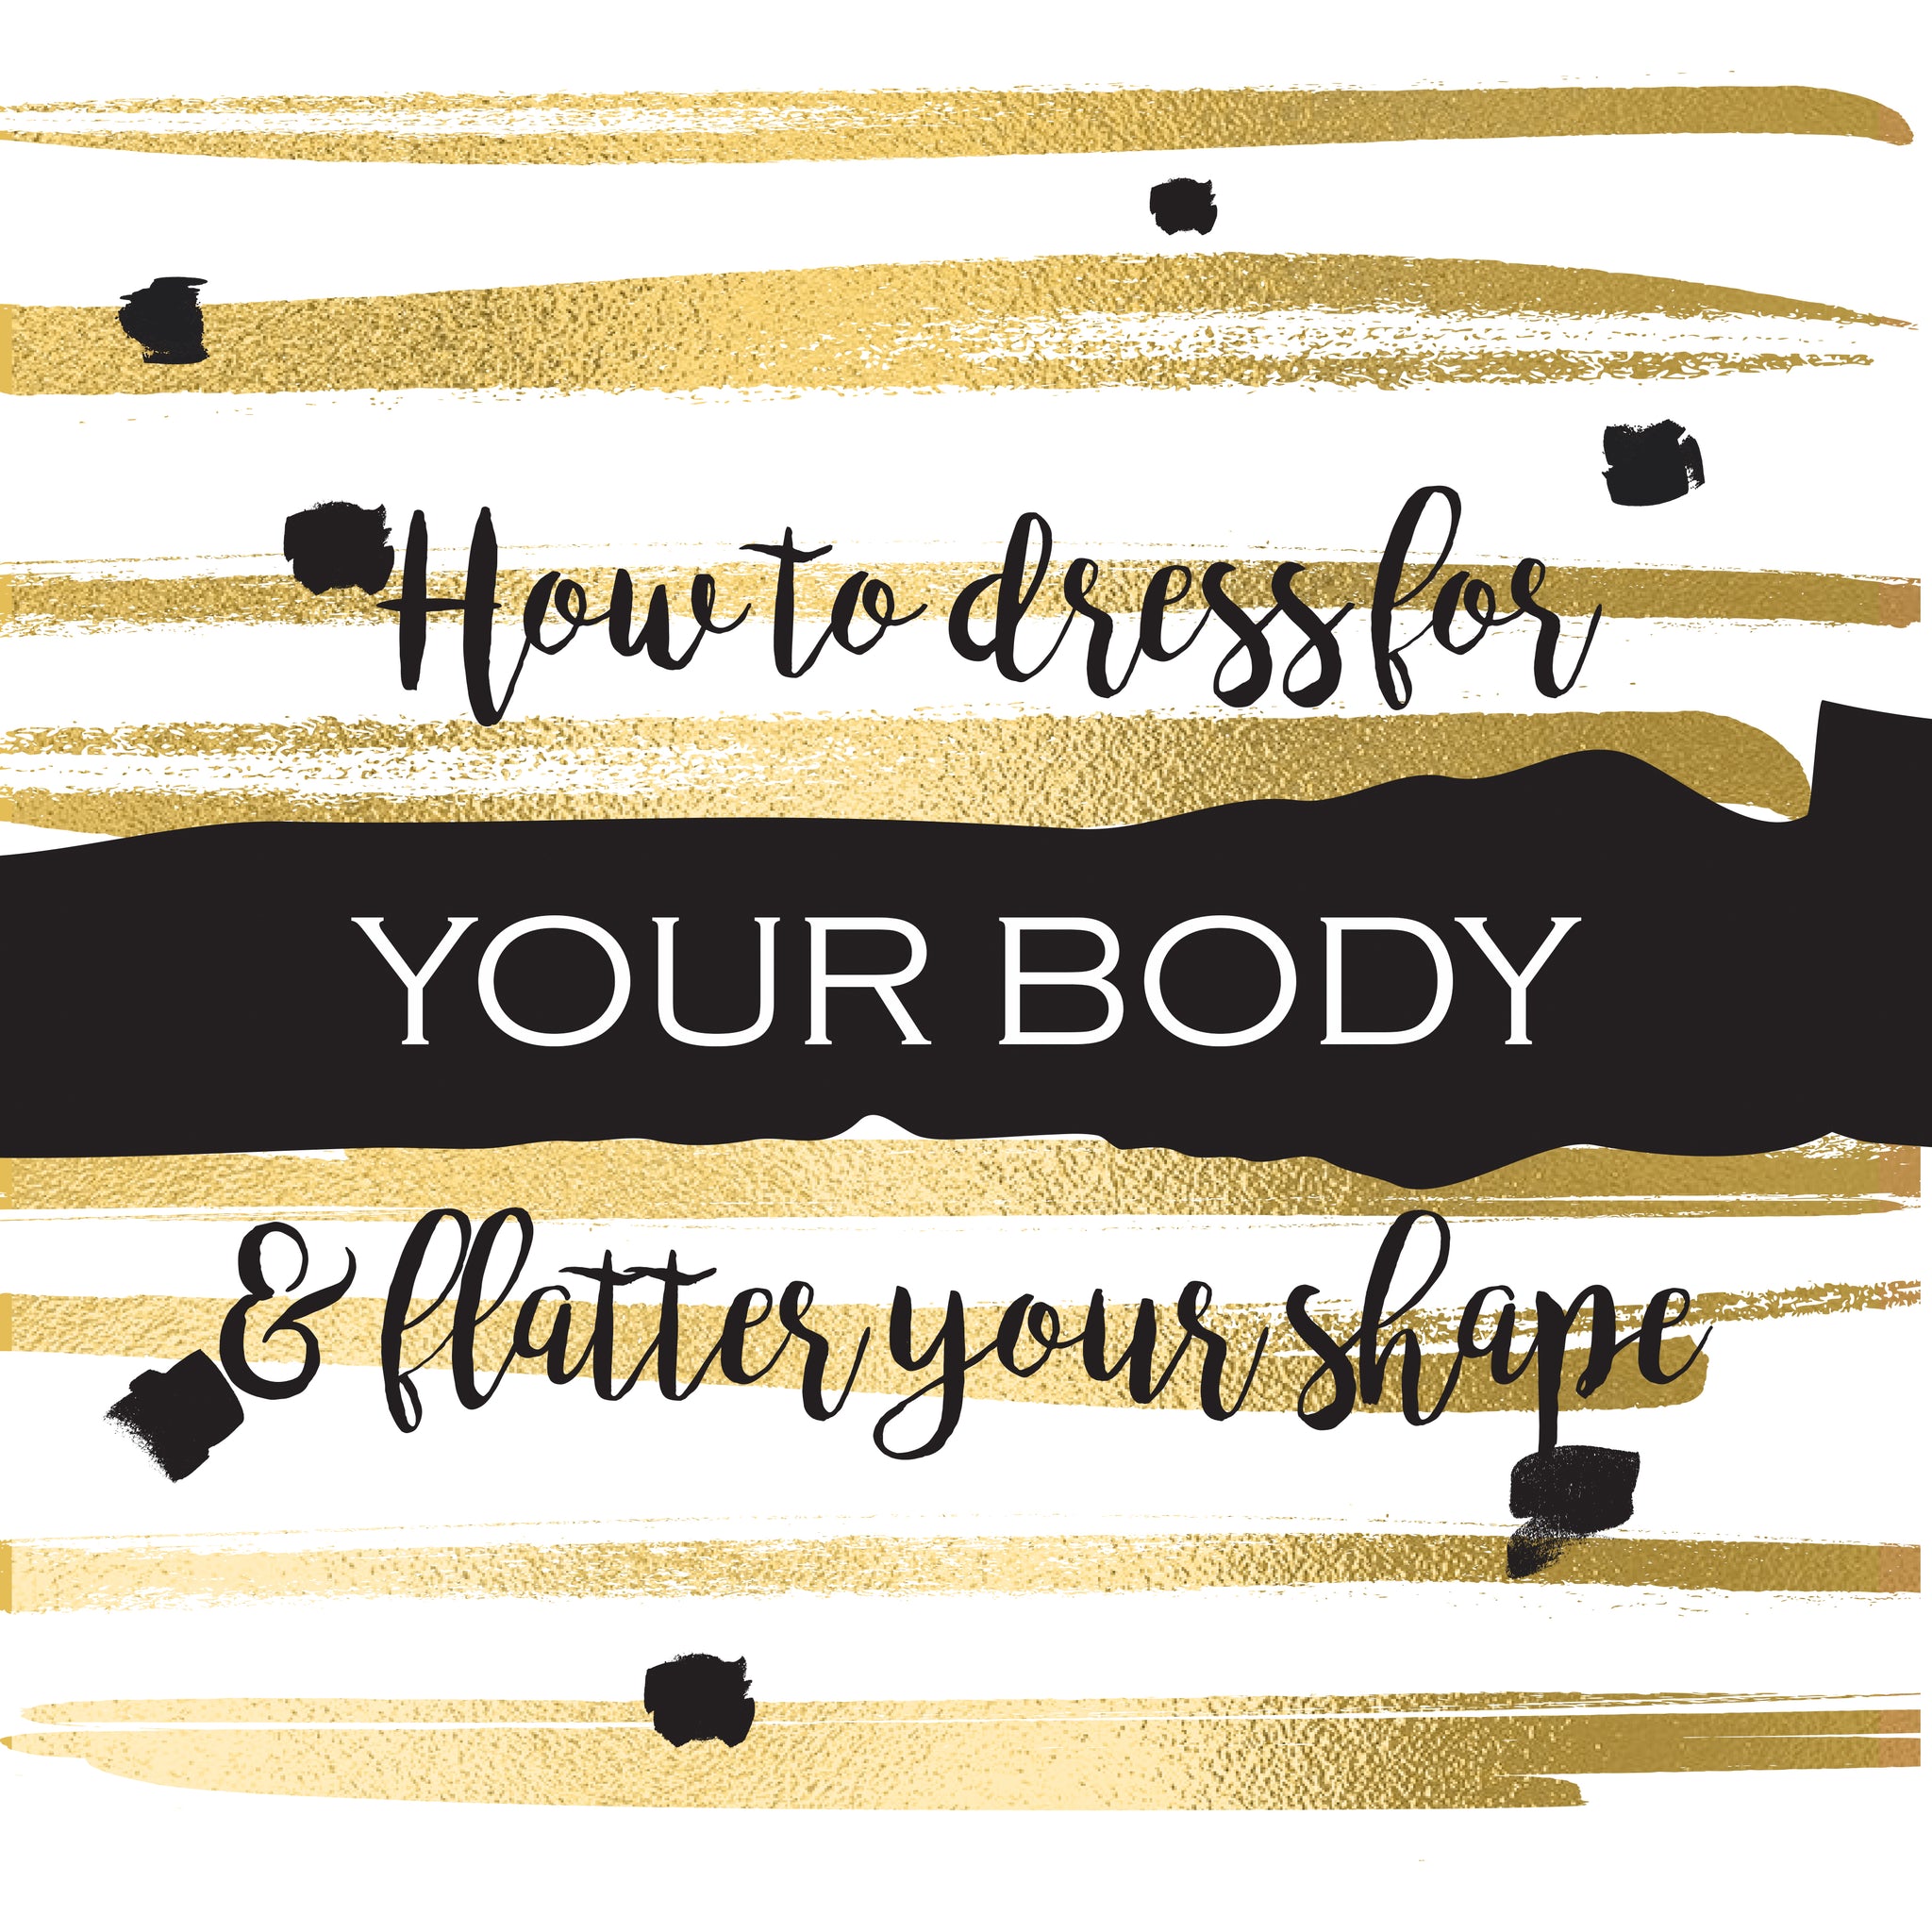 Learn your shape and how to flatter it